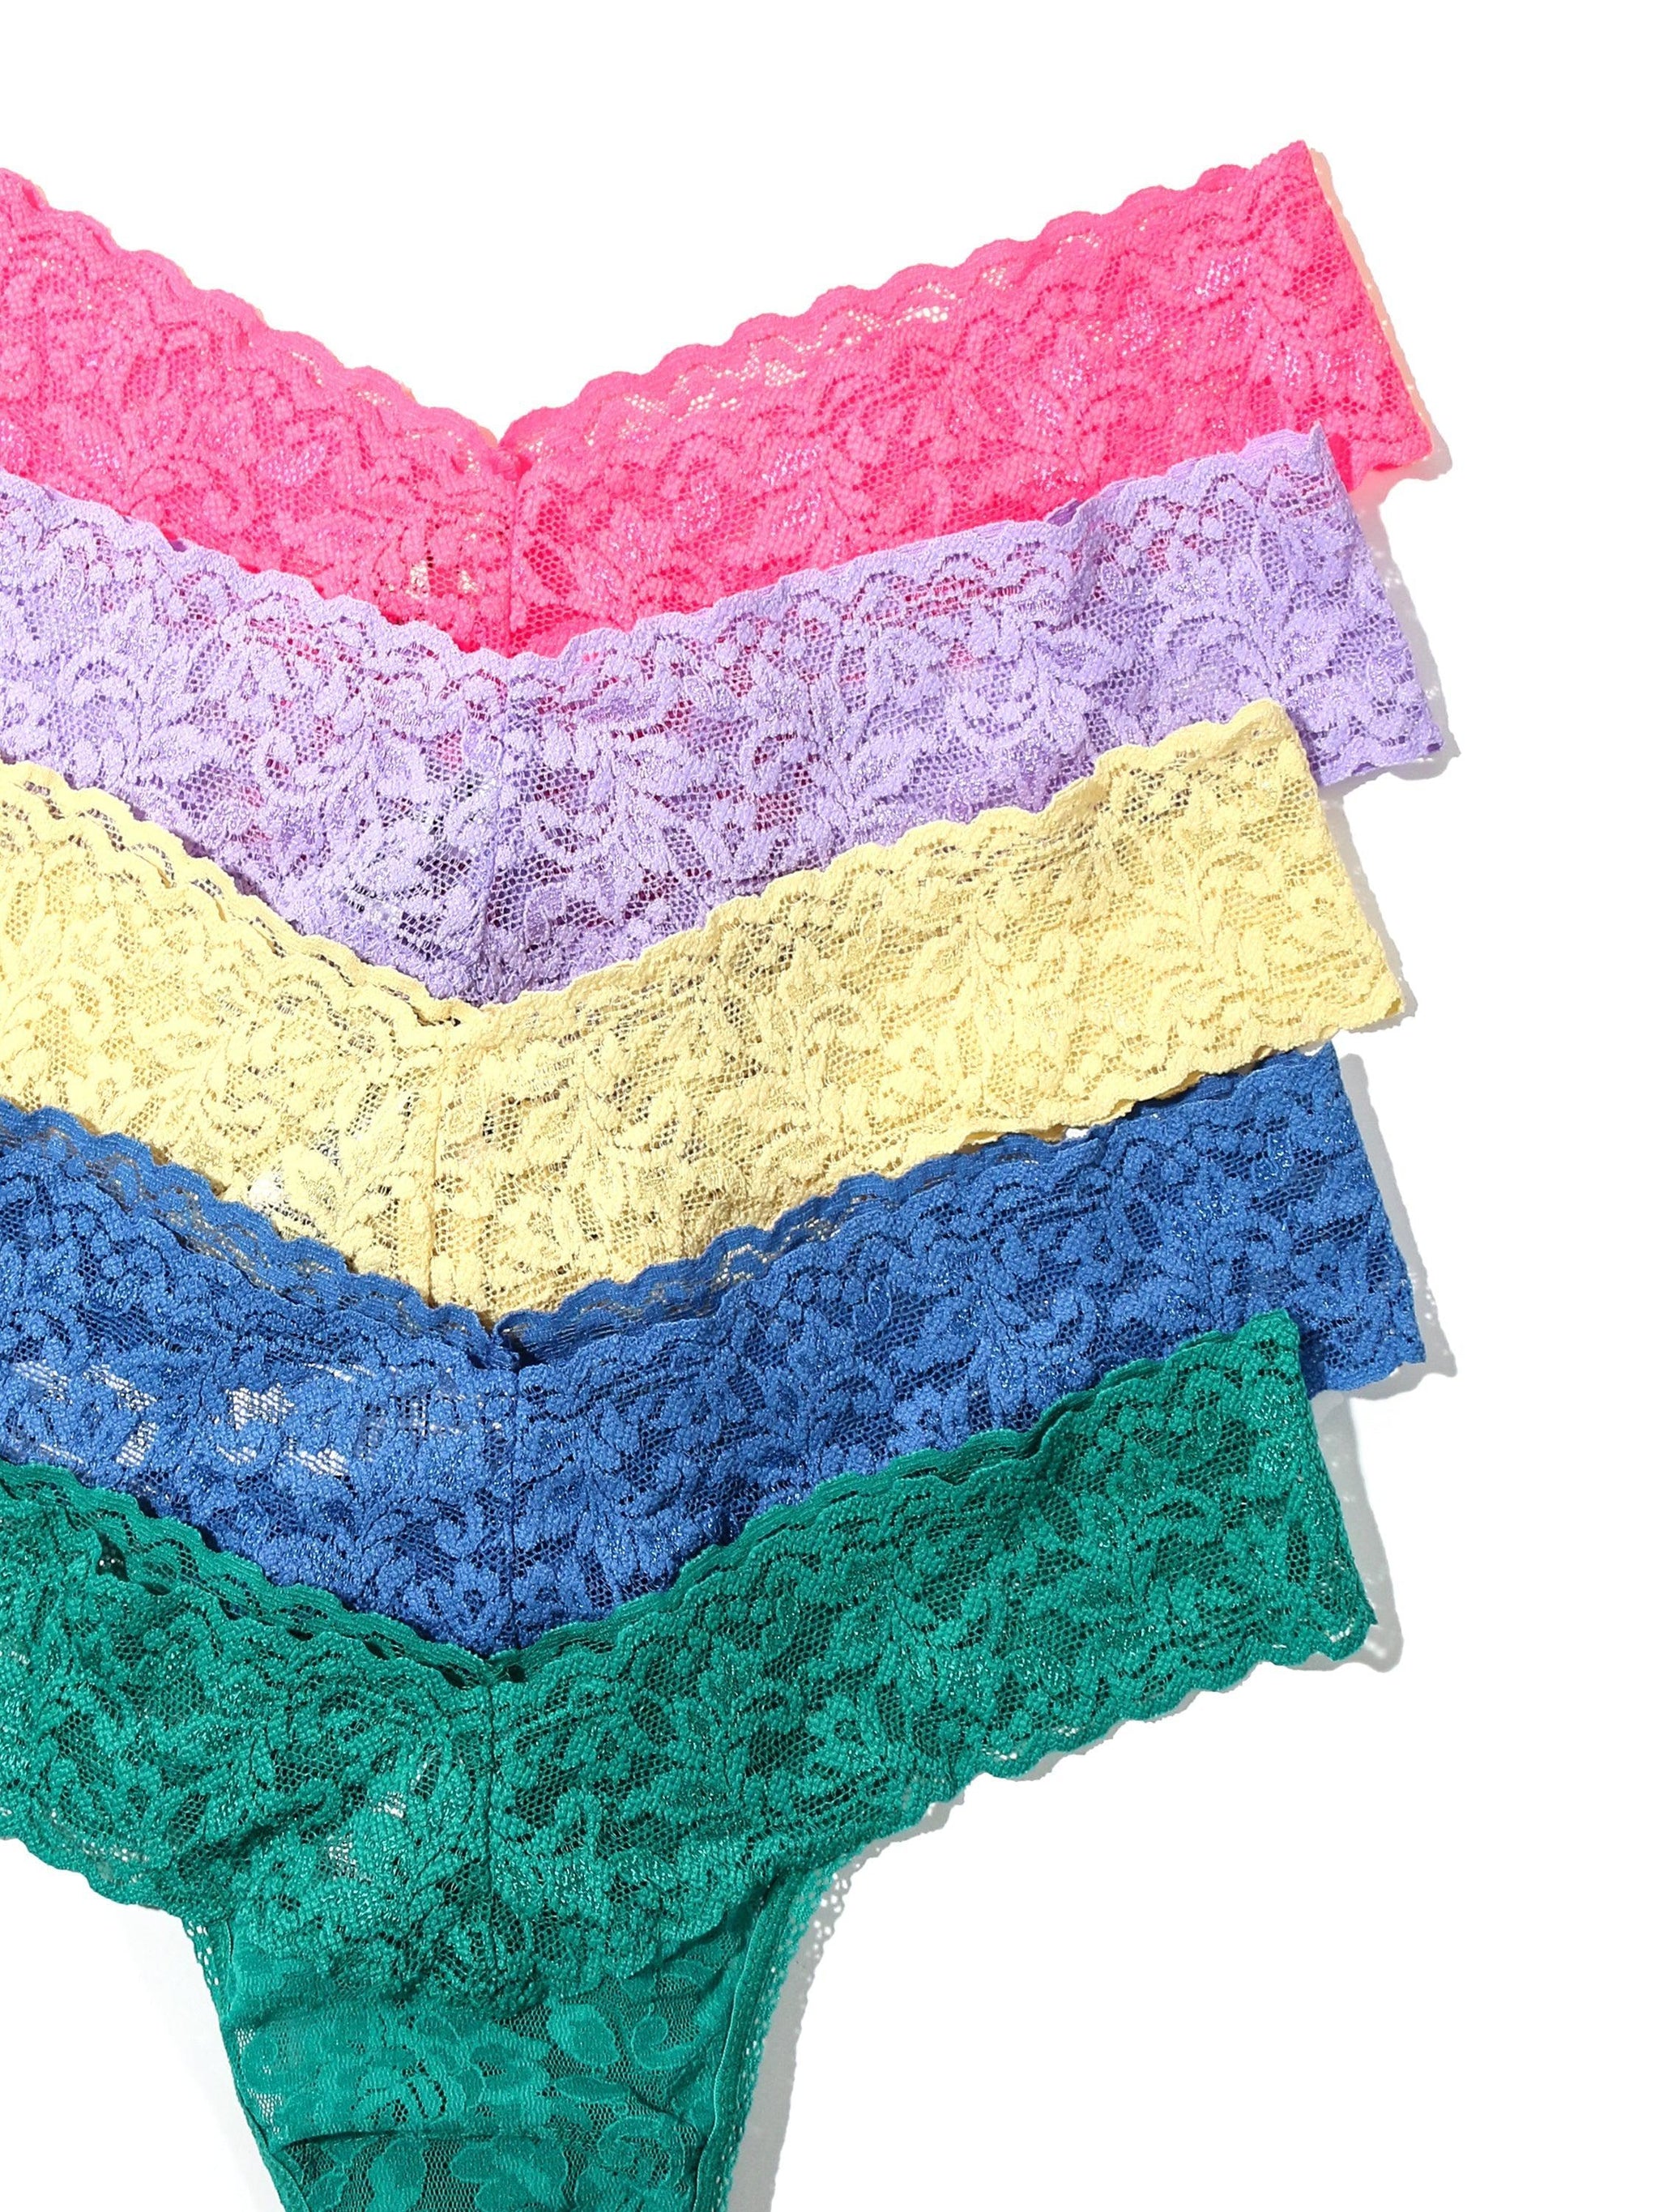 5 Pack Petite Size Signature Lace Thongs in Printed Box Sale